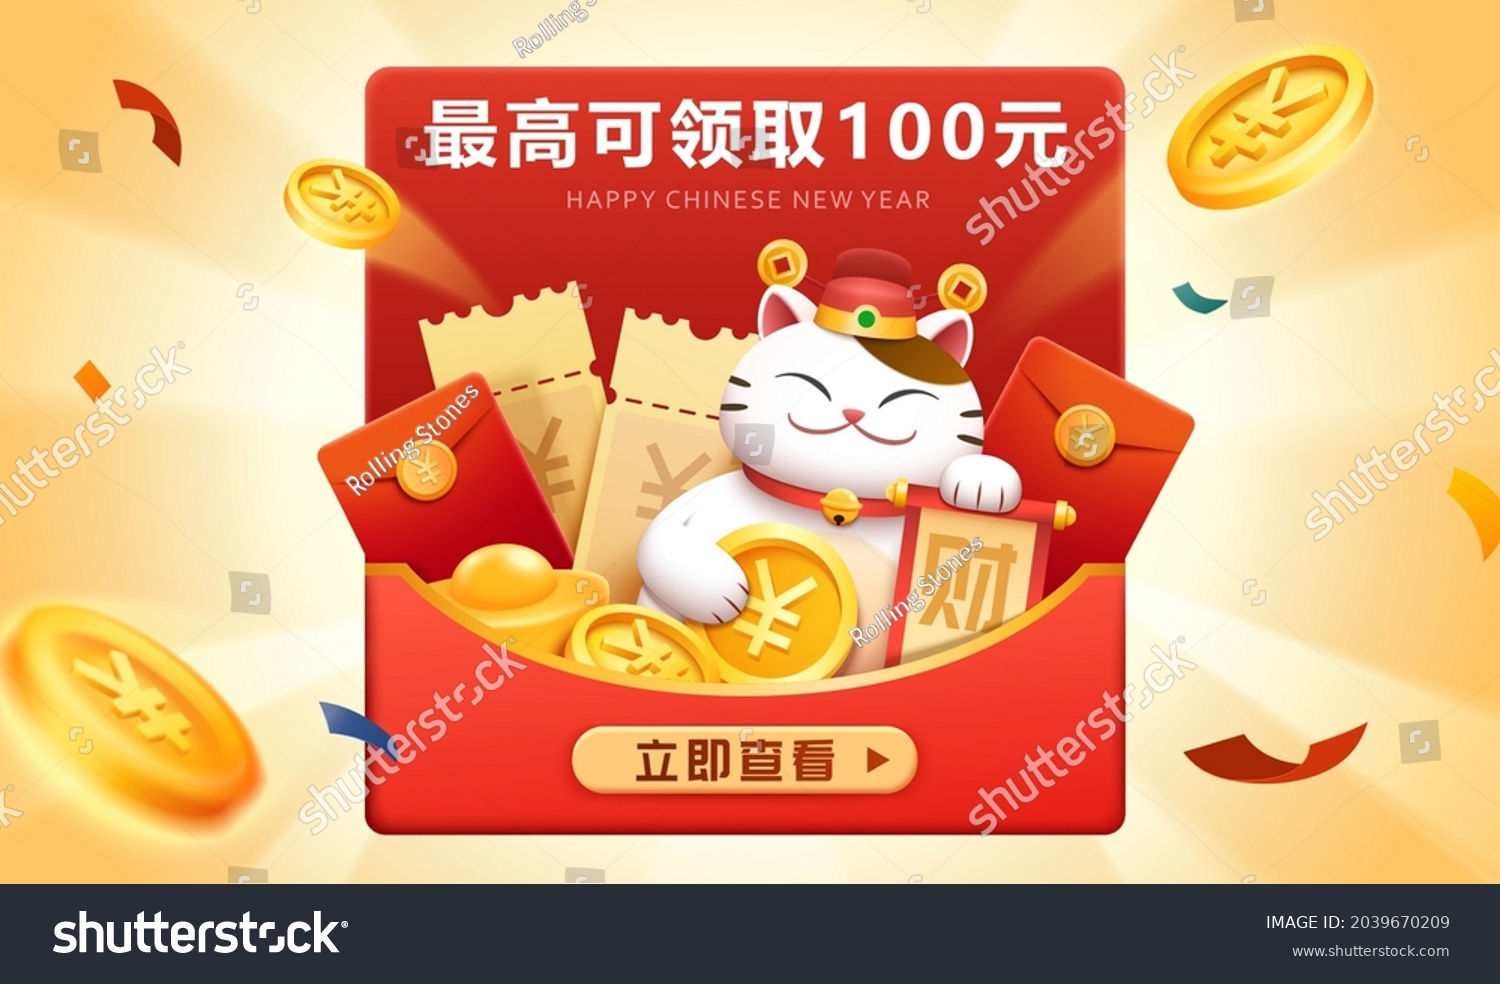 SVG of Claiming CNY lucky money banner. Large red envelope with coupons, coins and Maneki neko inside. Get bonus free up to RM100 and Check it out written in Chinese. svg